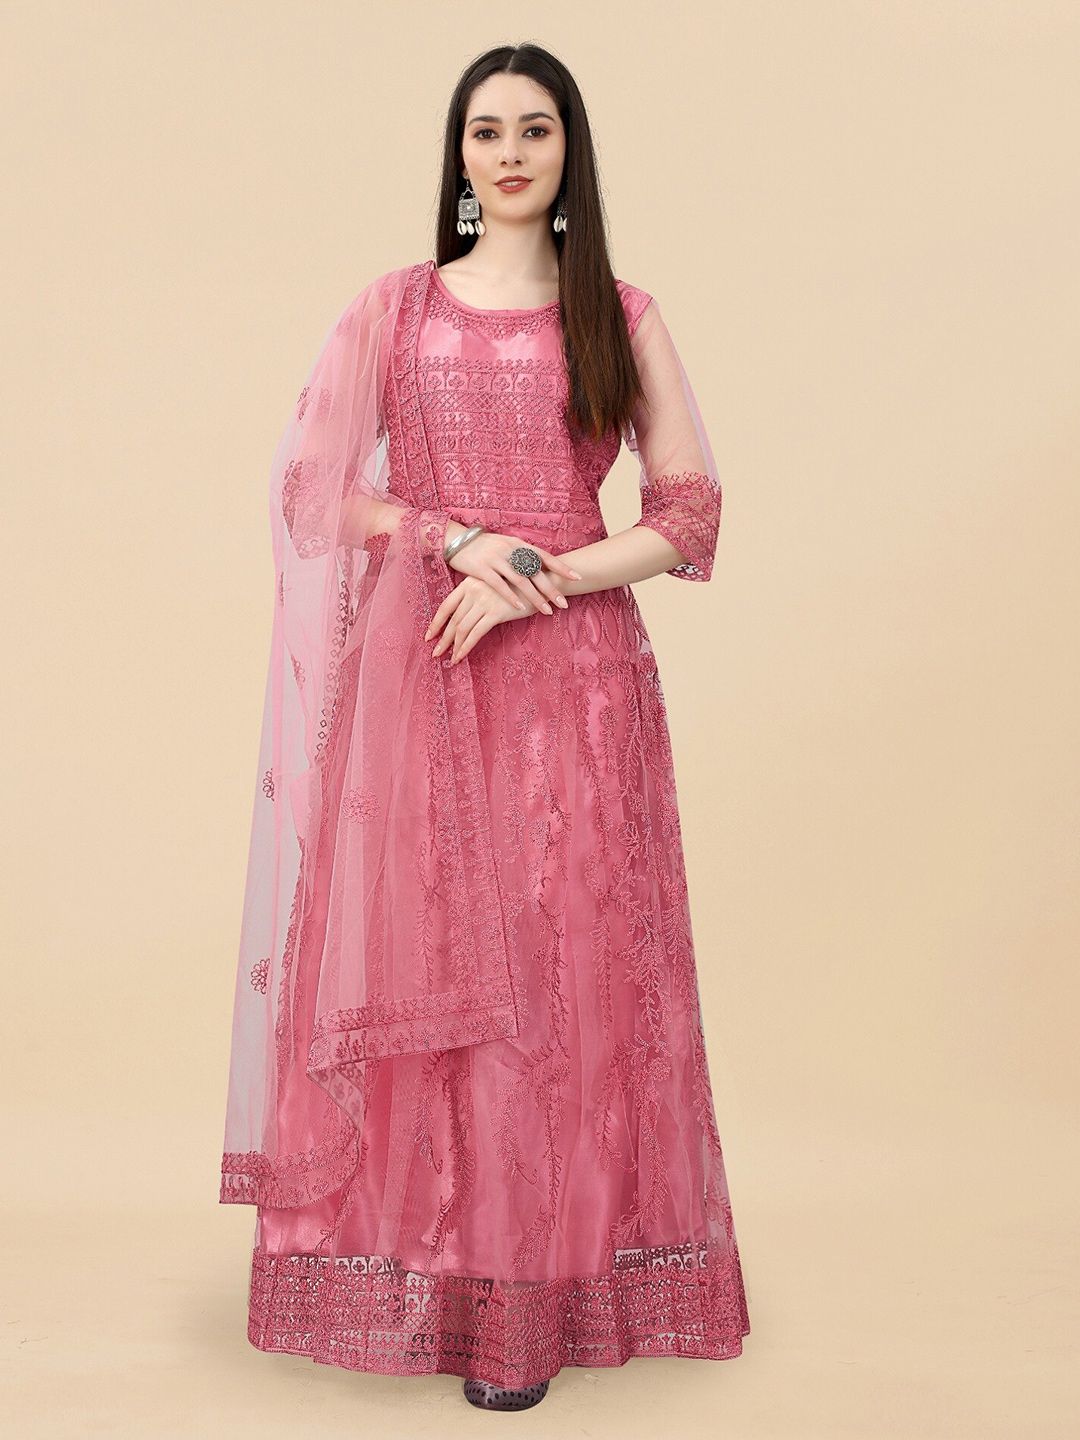 APNISHA Ethnic Motifs Embroidered Semi-Stitched Gown Dress Price in India